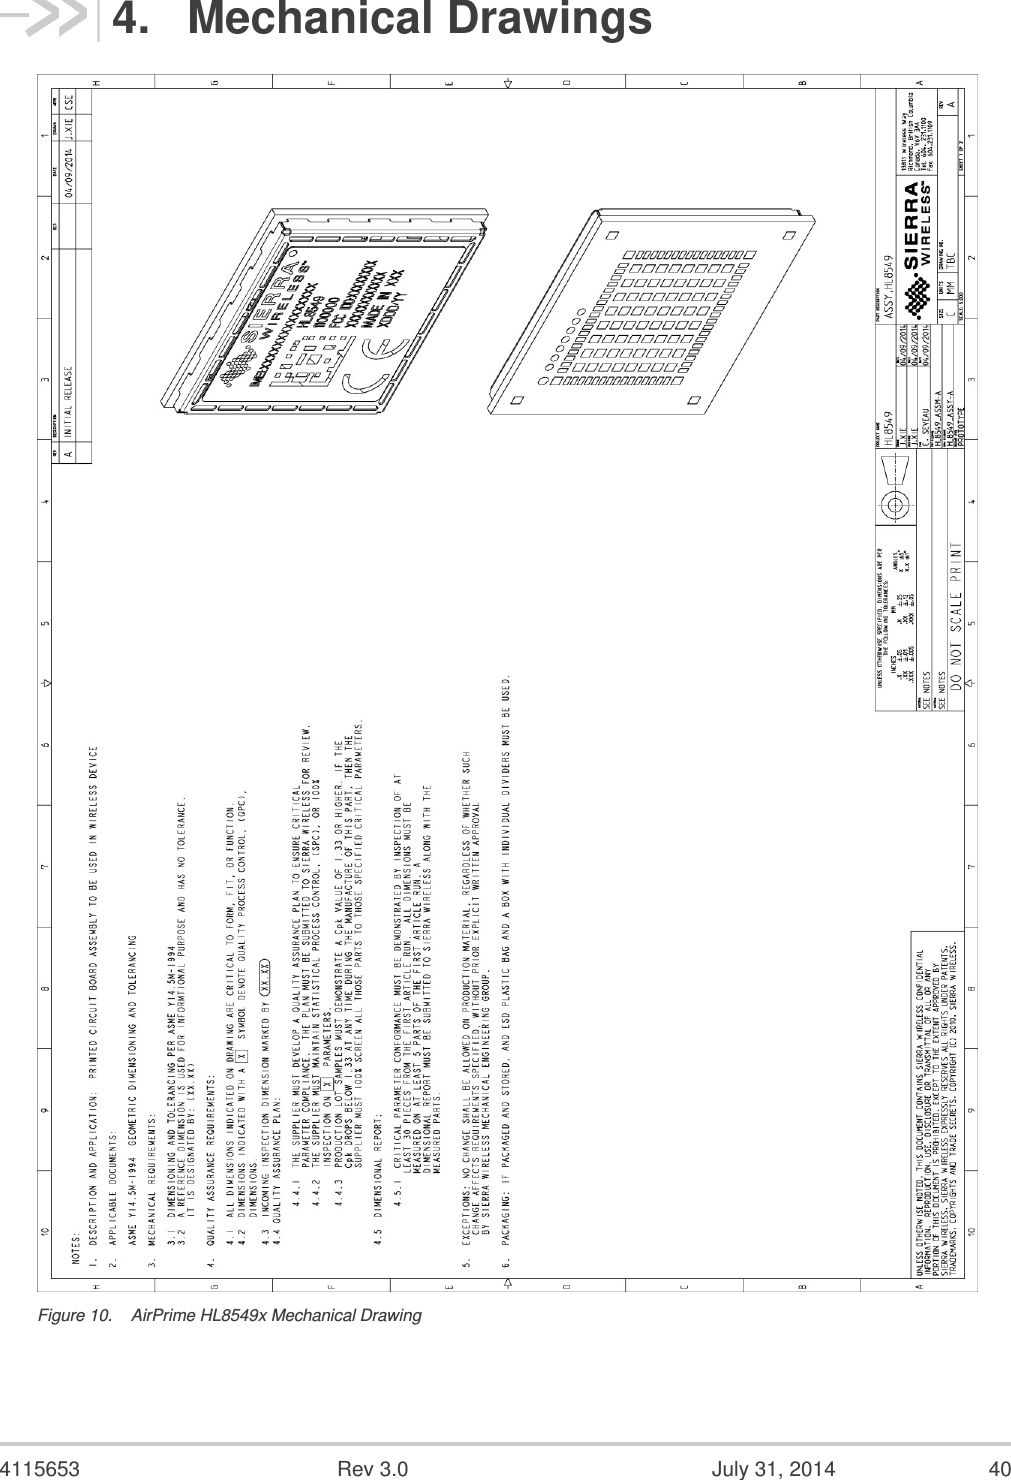  4115653  Rev 3.0  July 31, 2014  40 4.  Mechanical Drawings  Figure 10.  AirPrime HL8549x Mechanical Drawing 